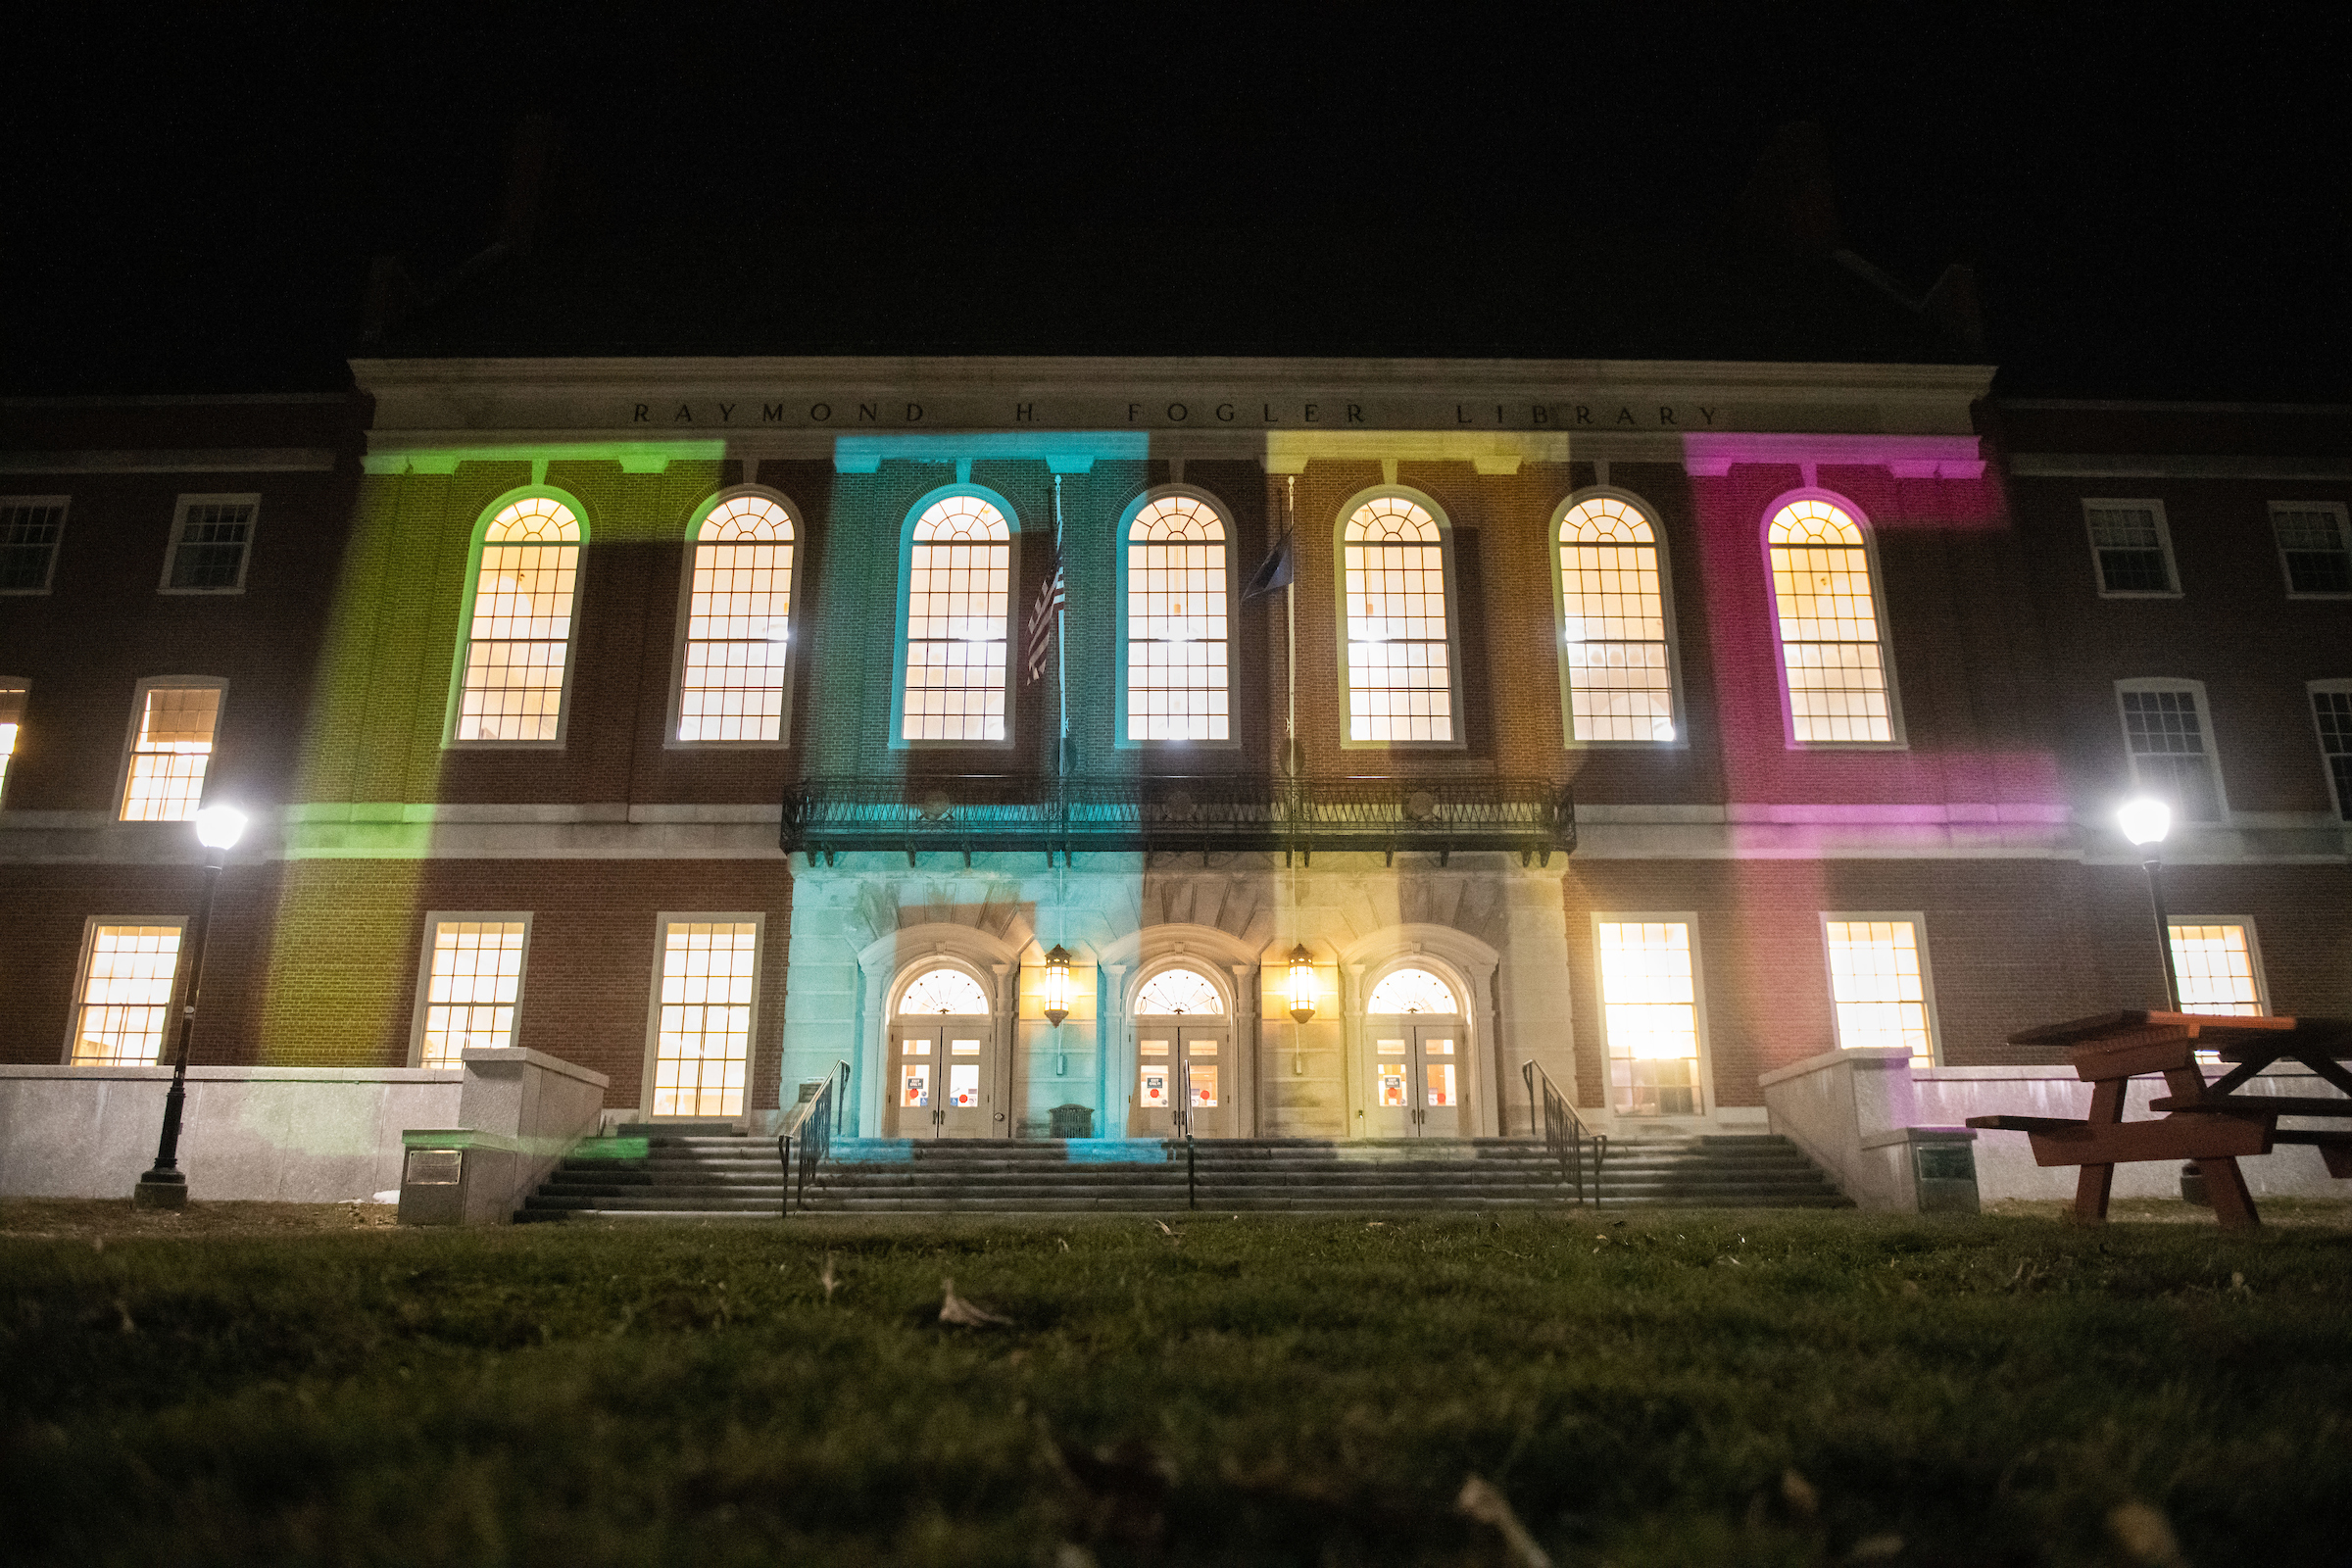 Fogler at night, with CARE projected onto building with multi-colored lights.